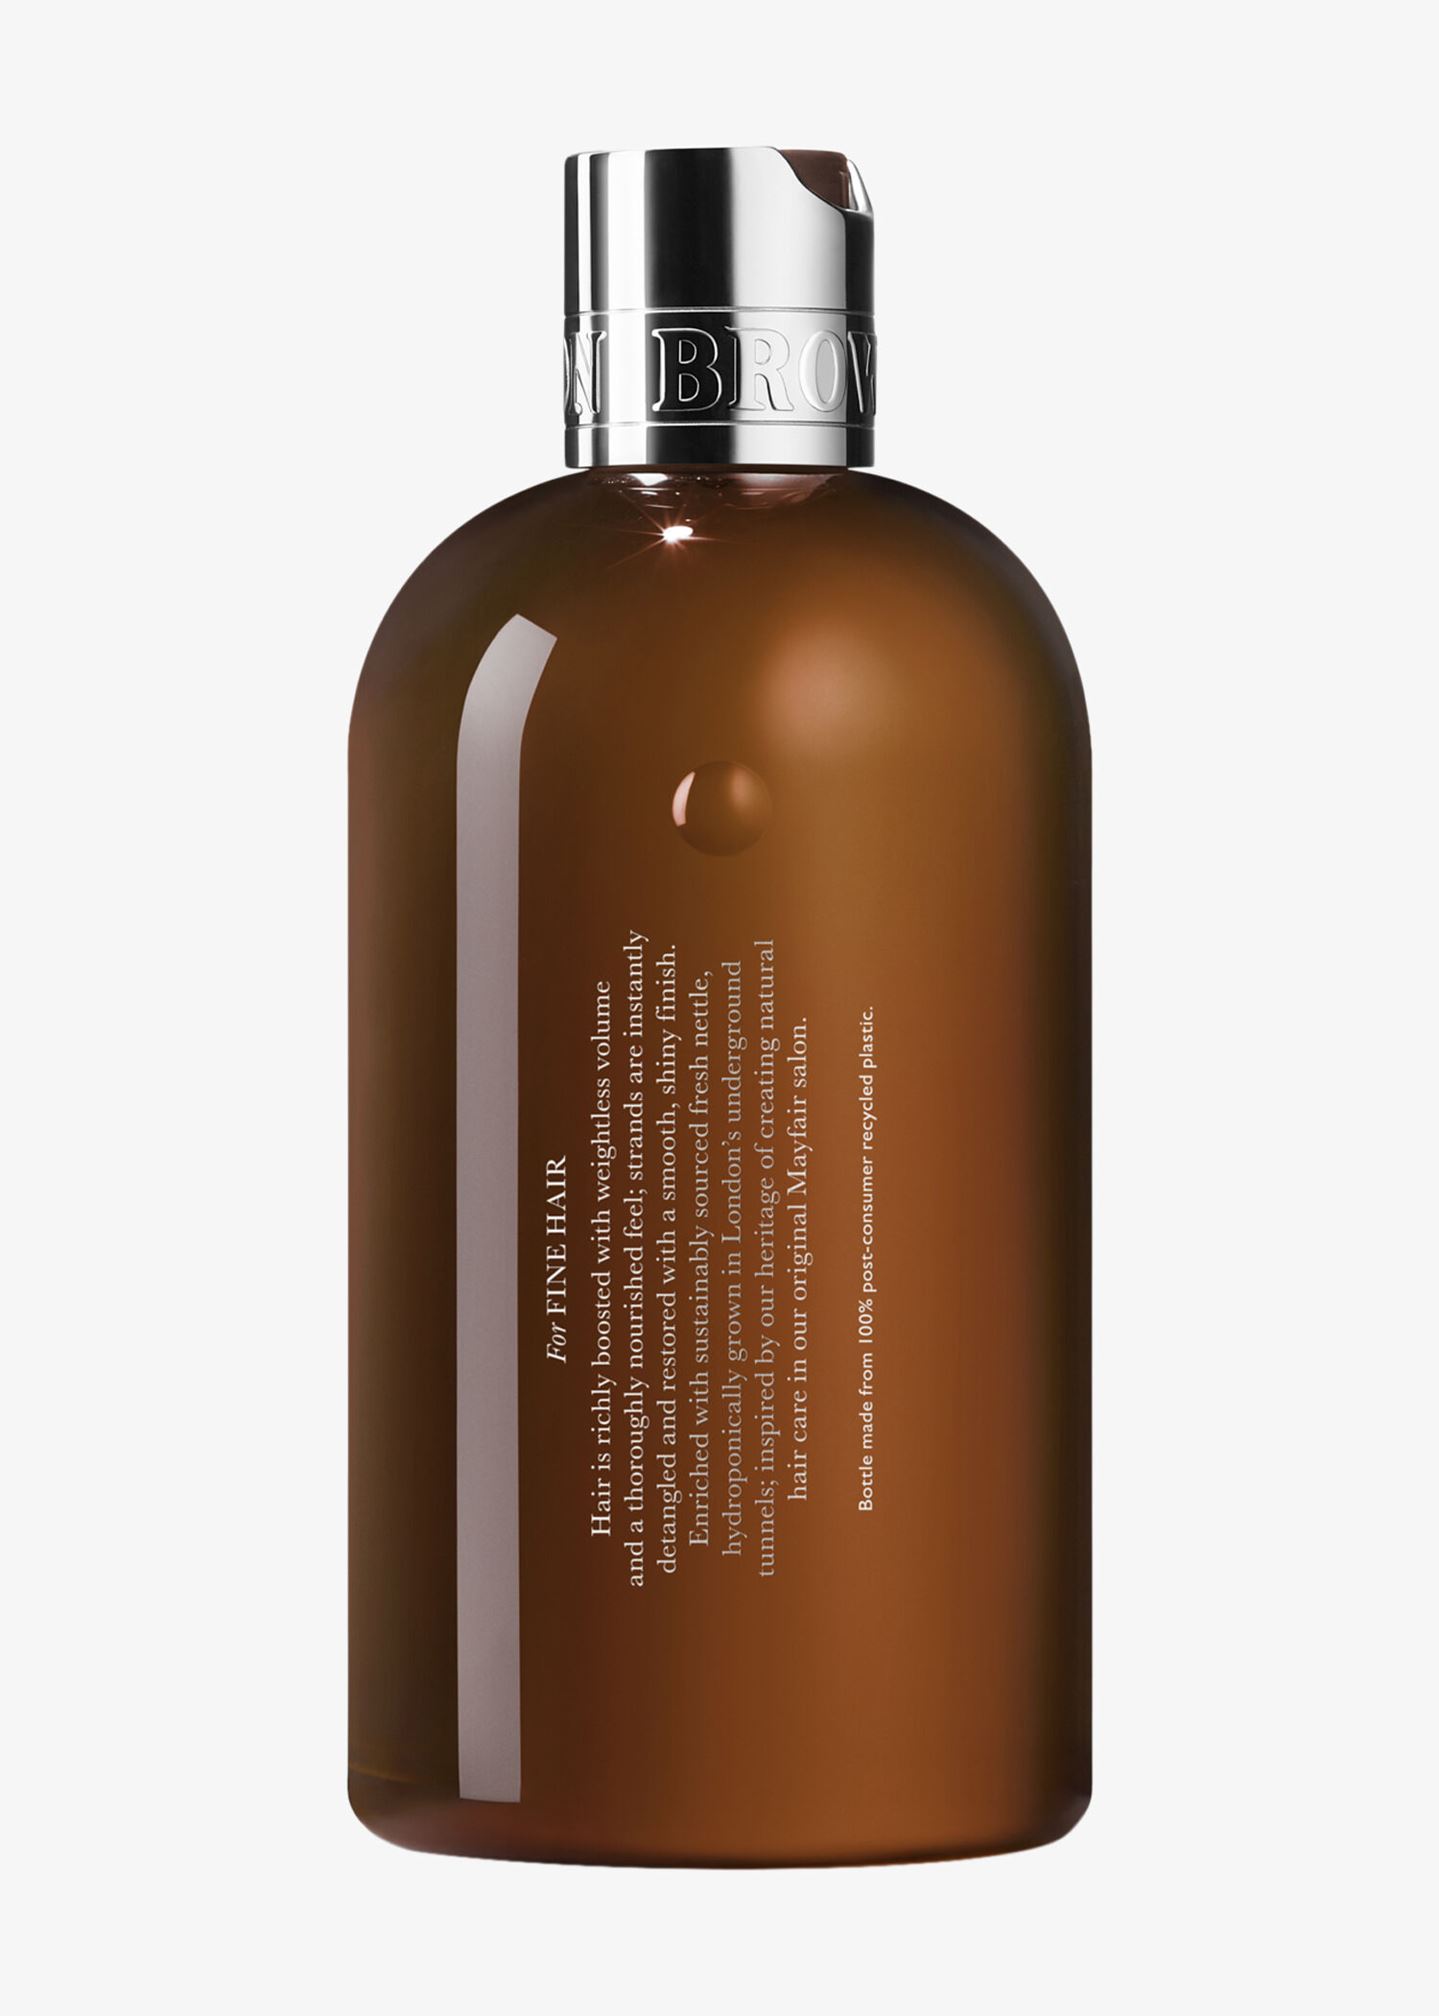 Conditioner «Volumising Conditioner with Nettle»